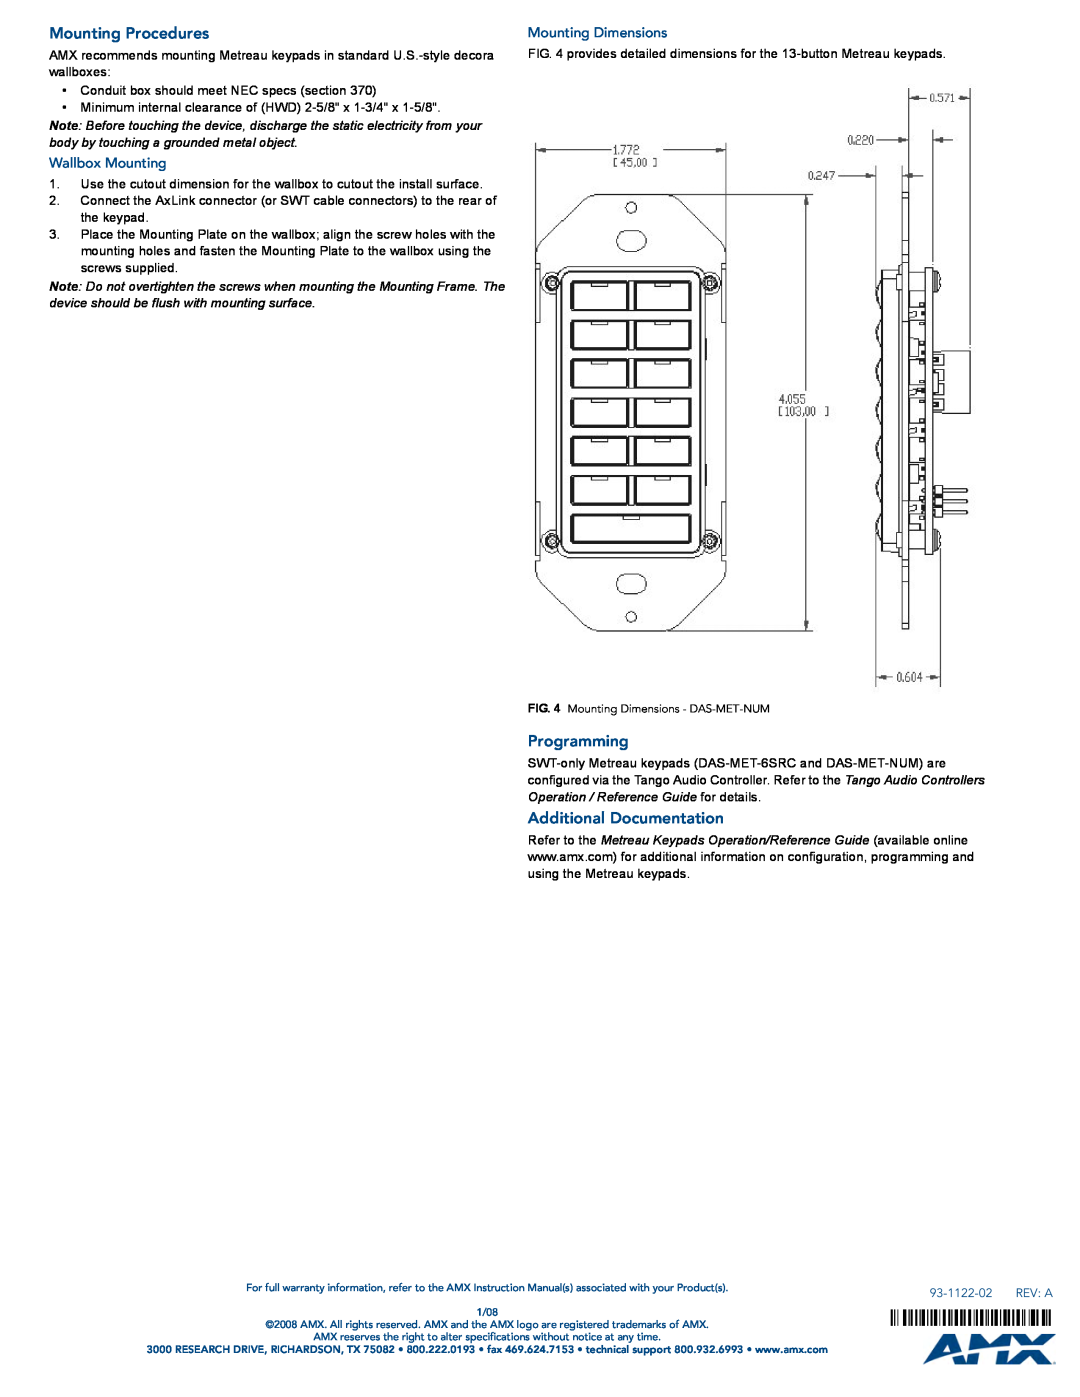 AMX DAS-MET-NUM Mounting Procedures, Programming, Additional Documentation, Wallbox Mounting, Mounting Dimensions 